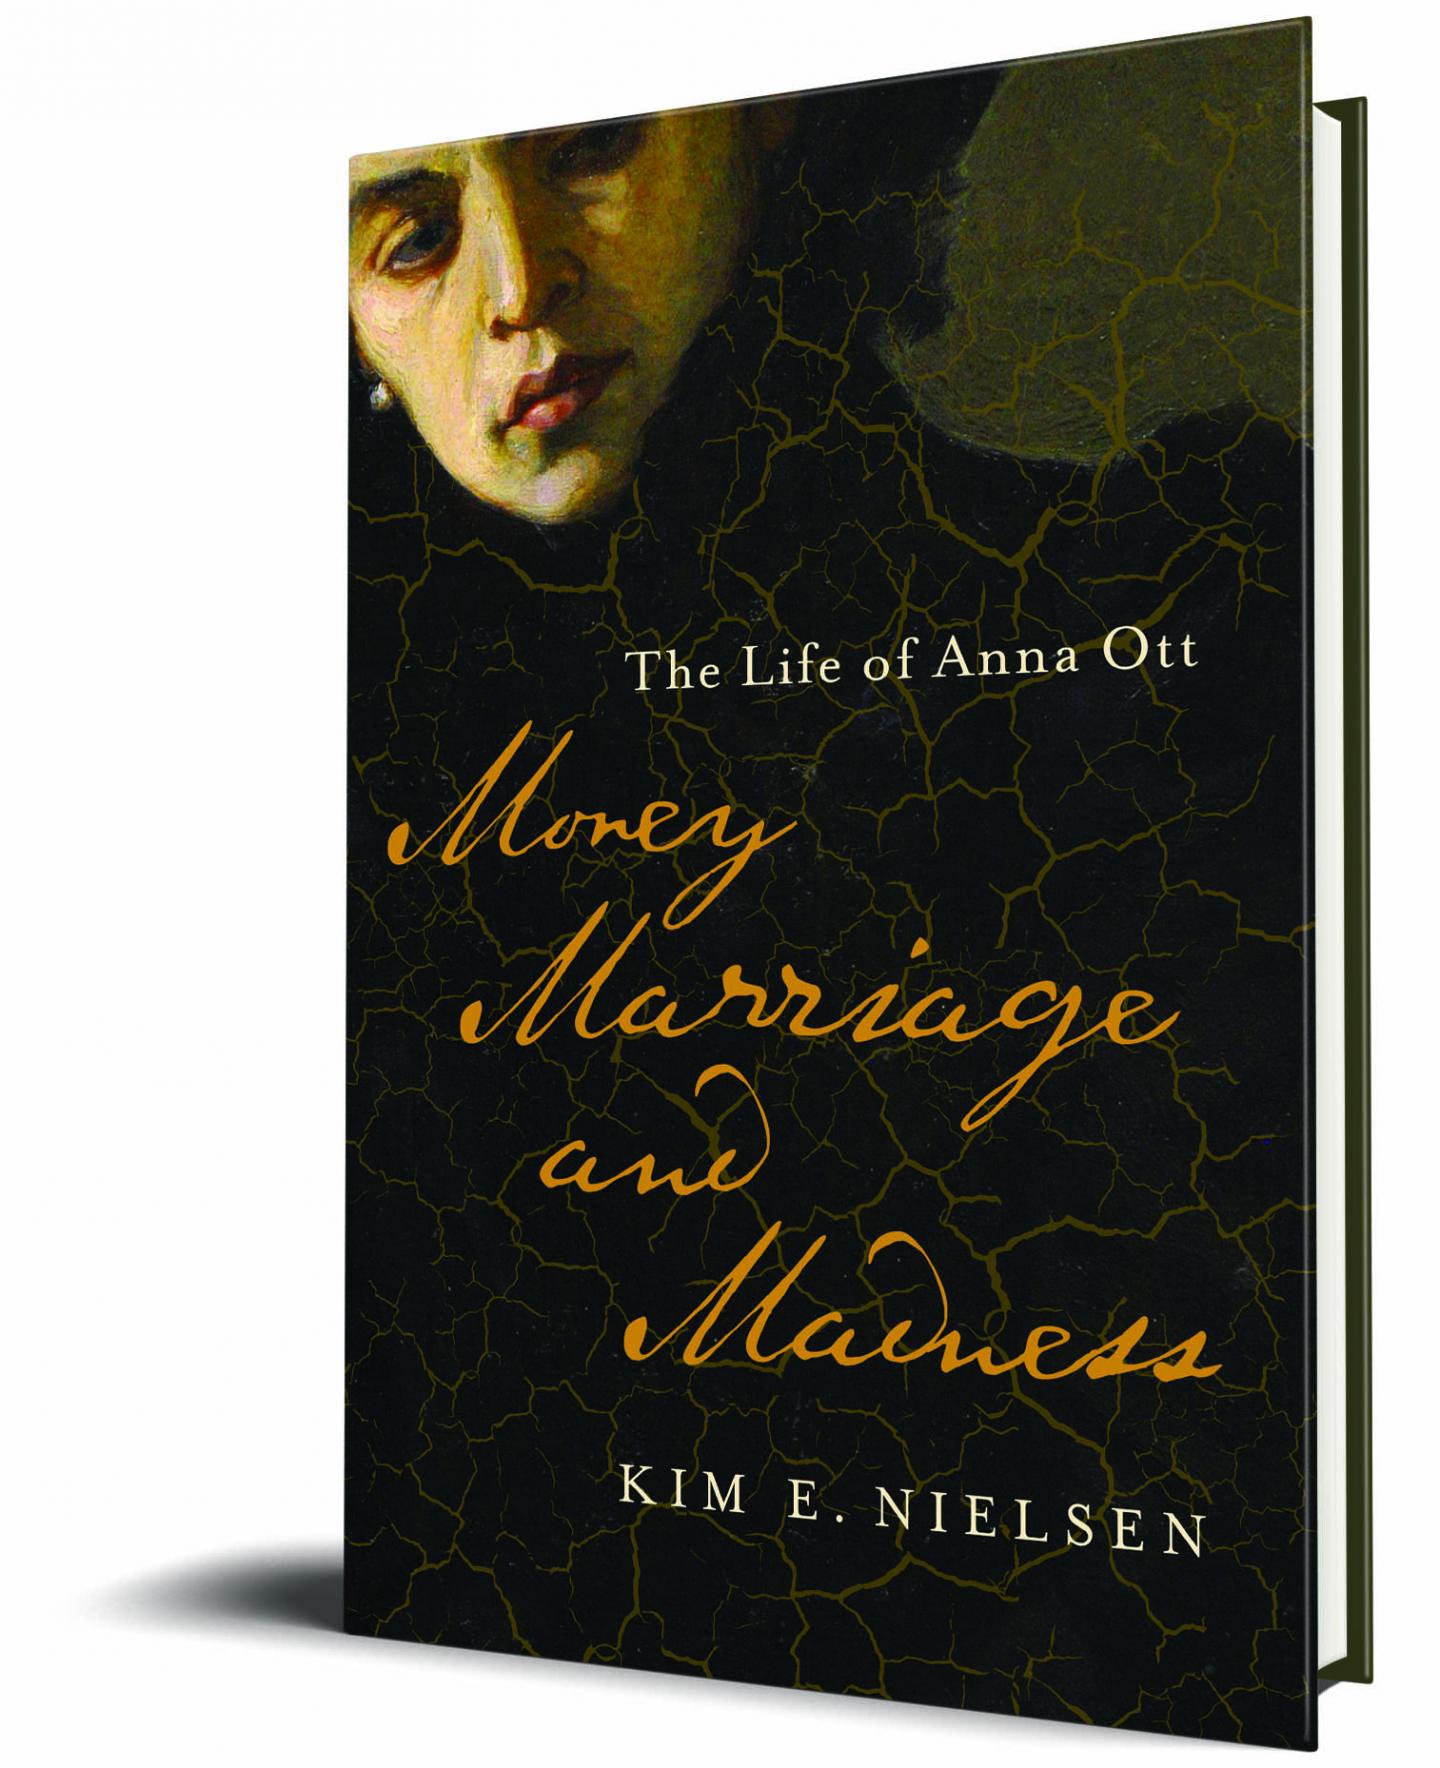 "Money, Marriage, and Madness: The Life of Anna Ott" by Dr. Kim Nielsen